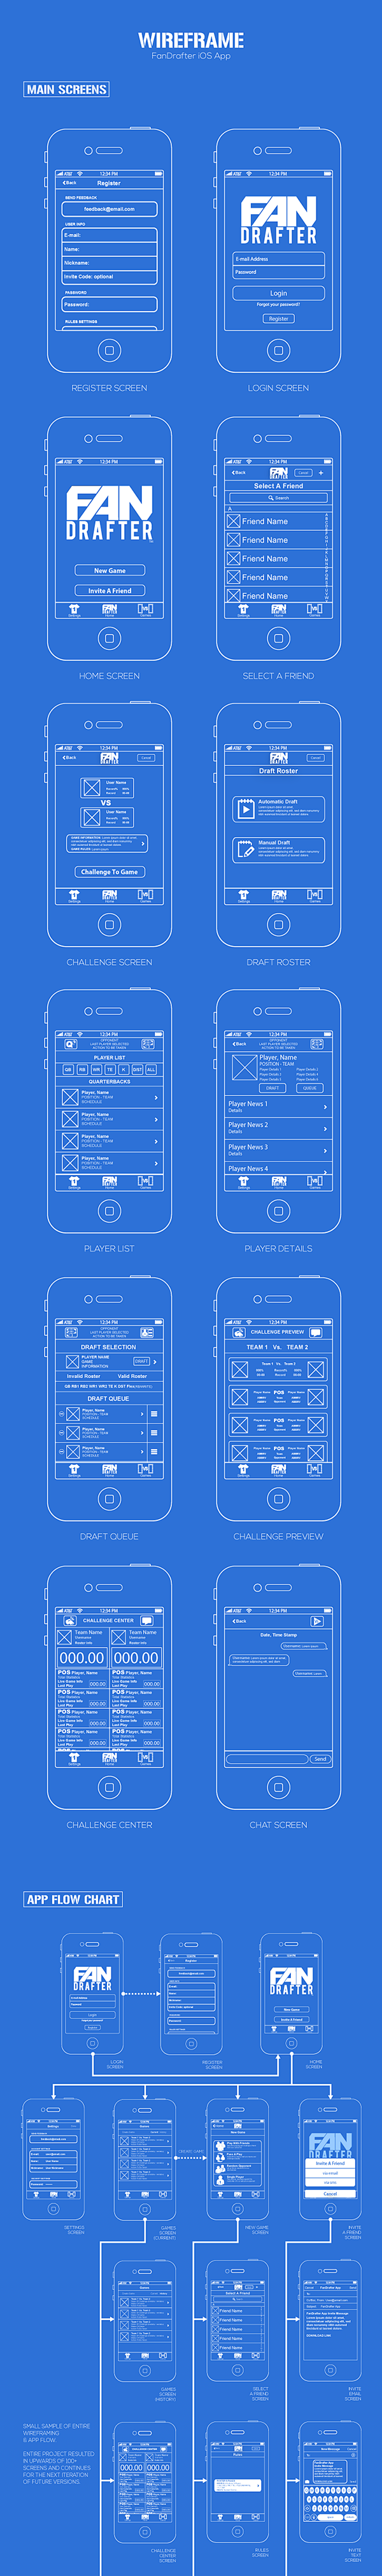 iPhone App Wireframe...